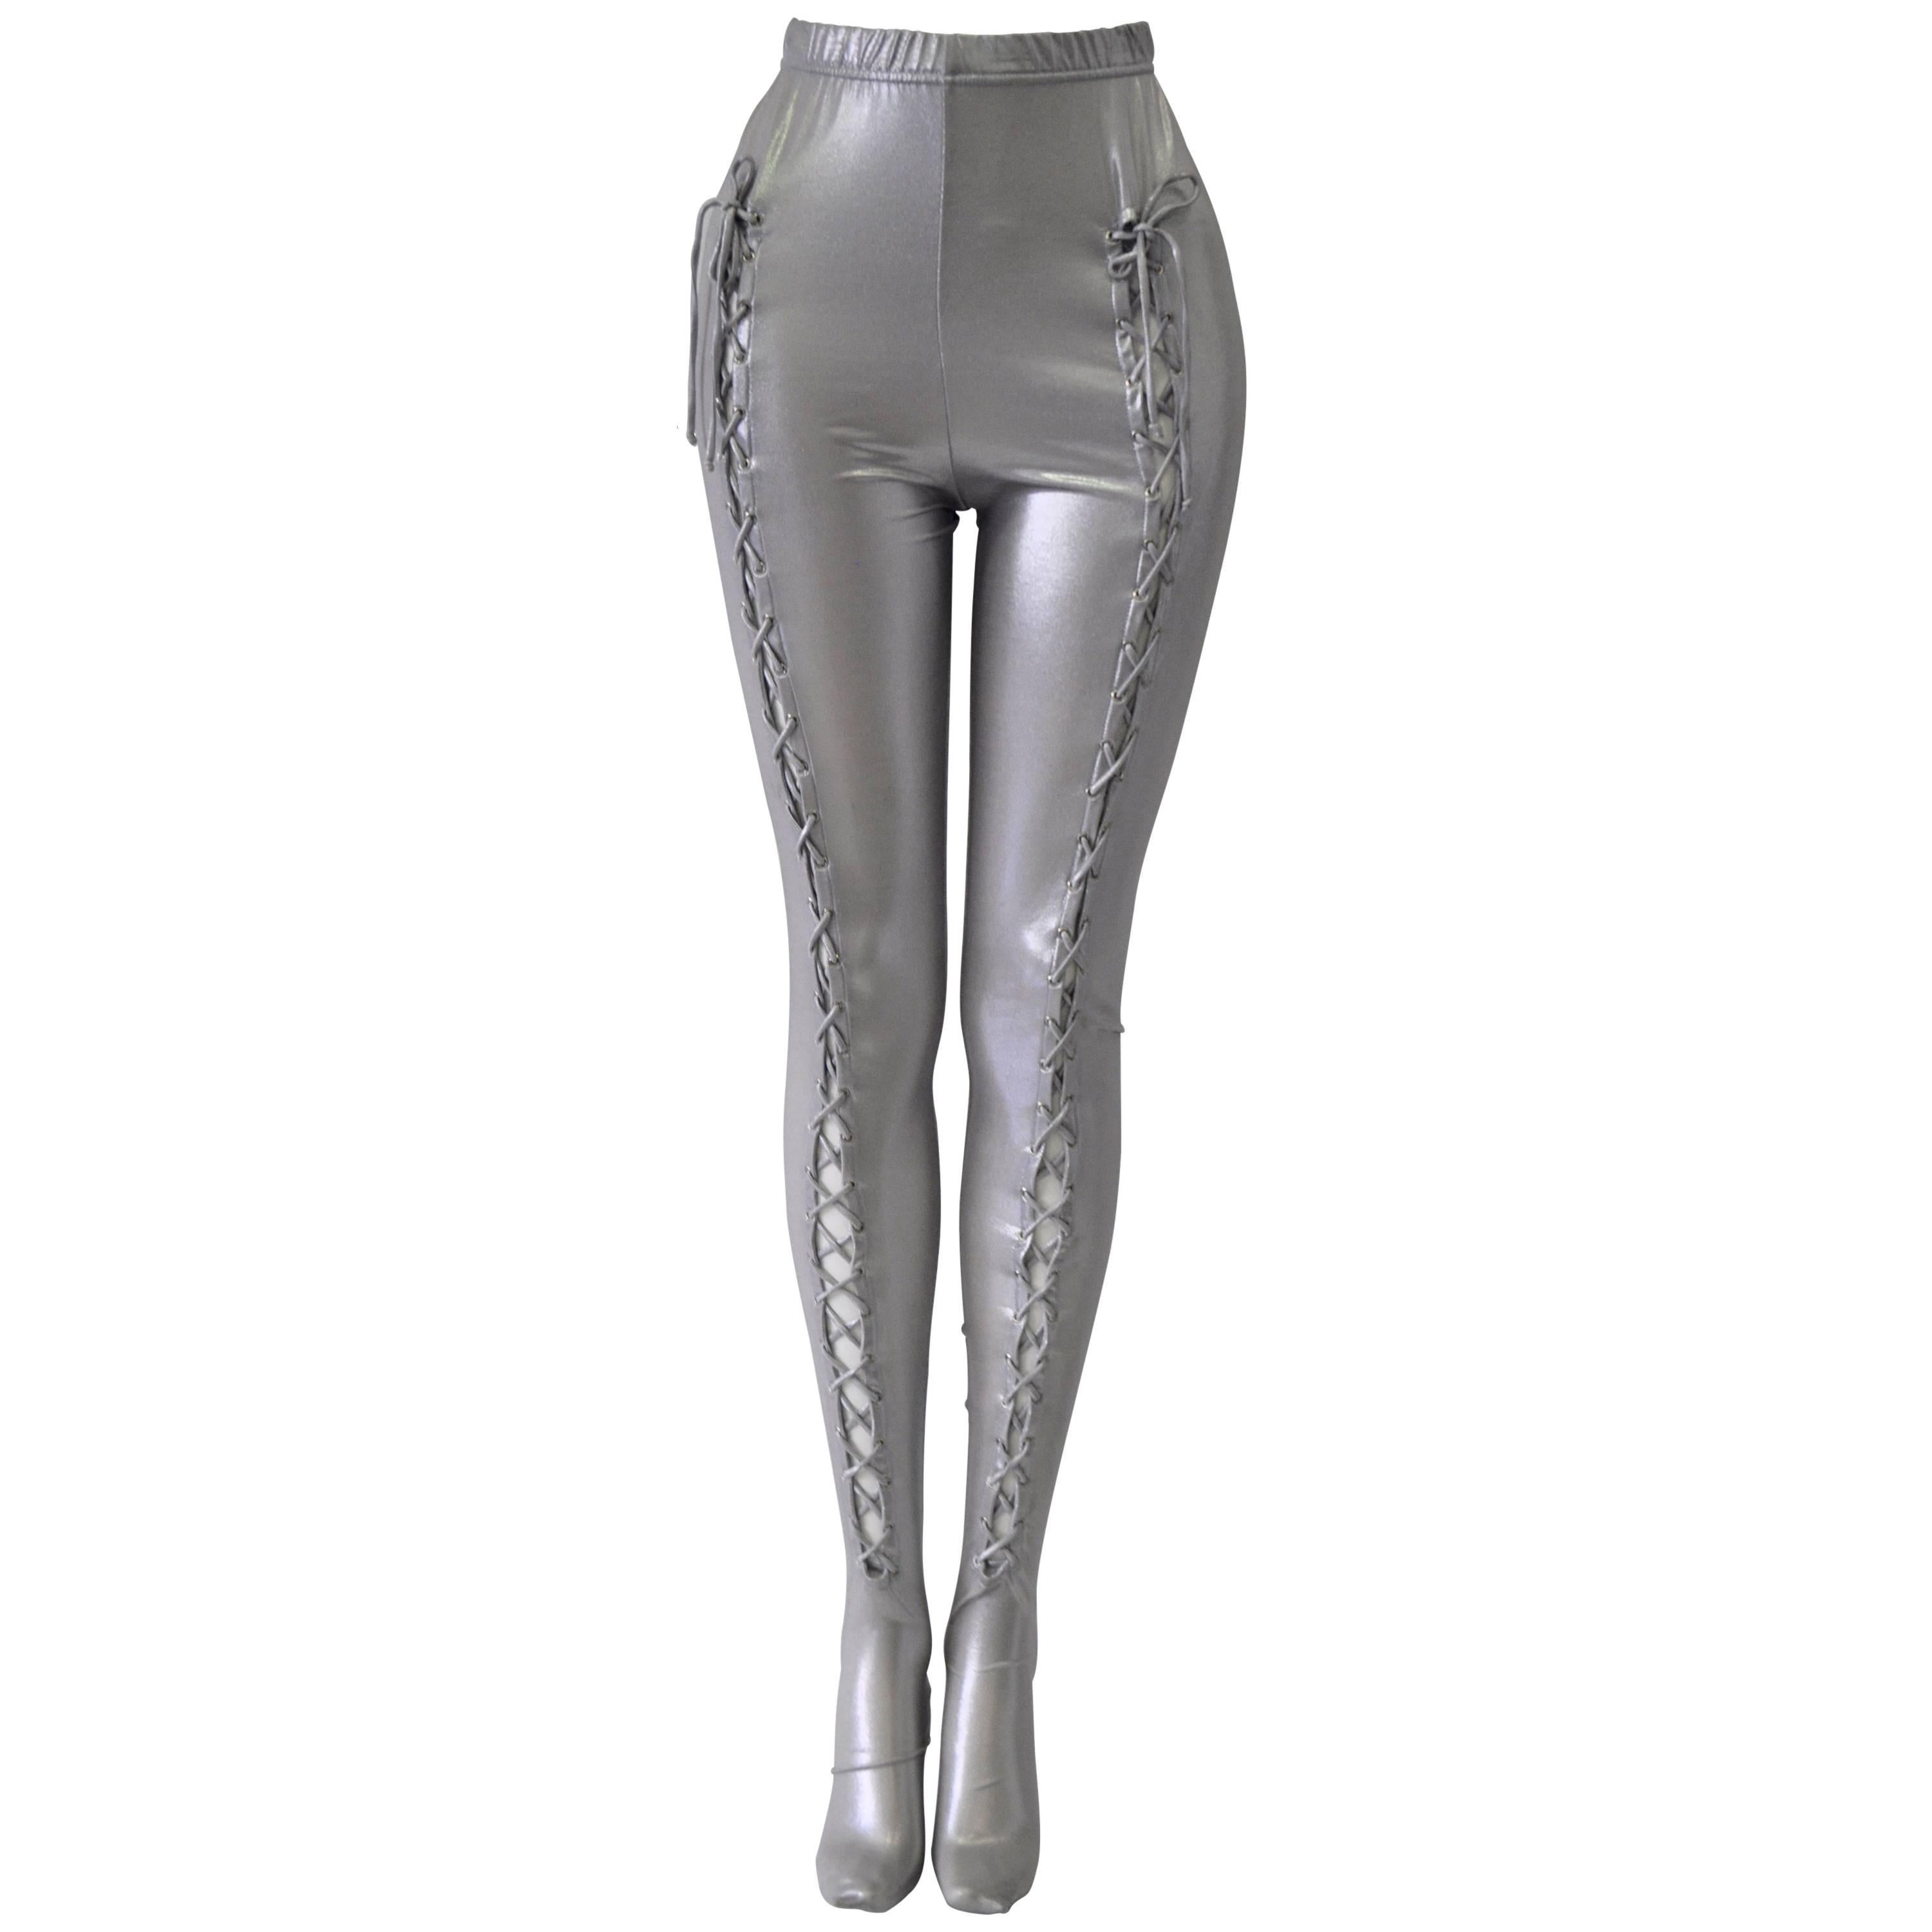 Extremely Rare Gianni Versace Intimo Silver Bondage Space Age Leggings For Sale